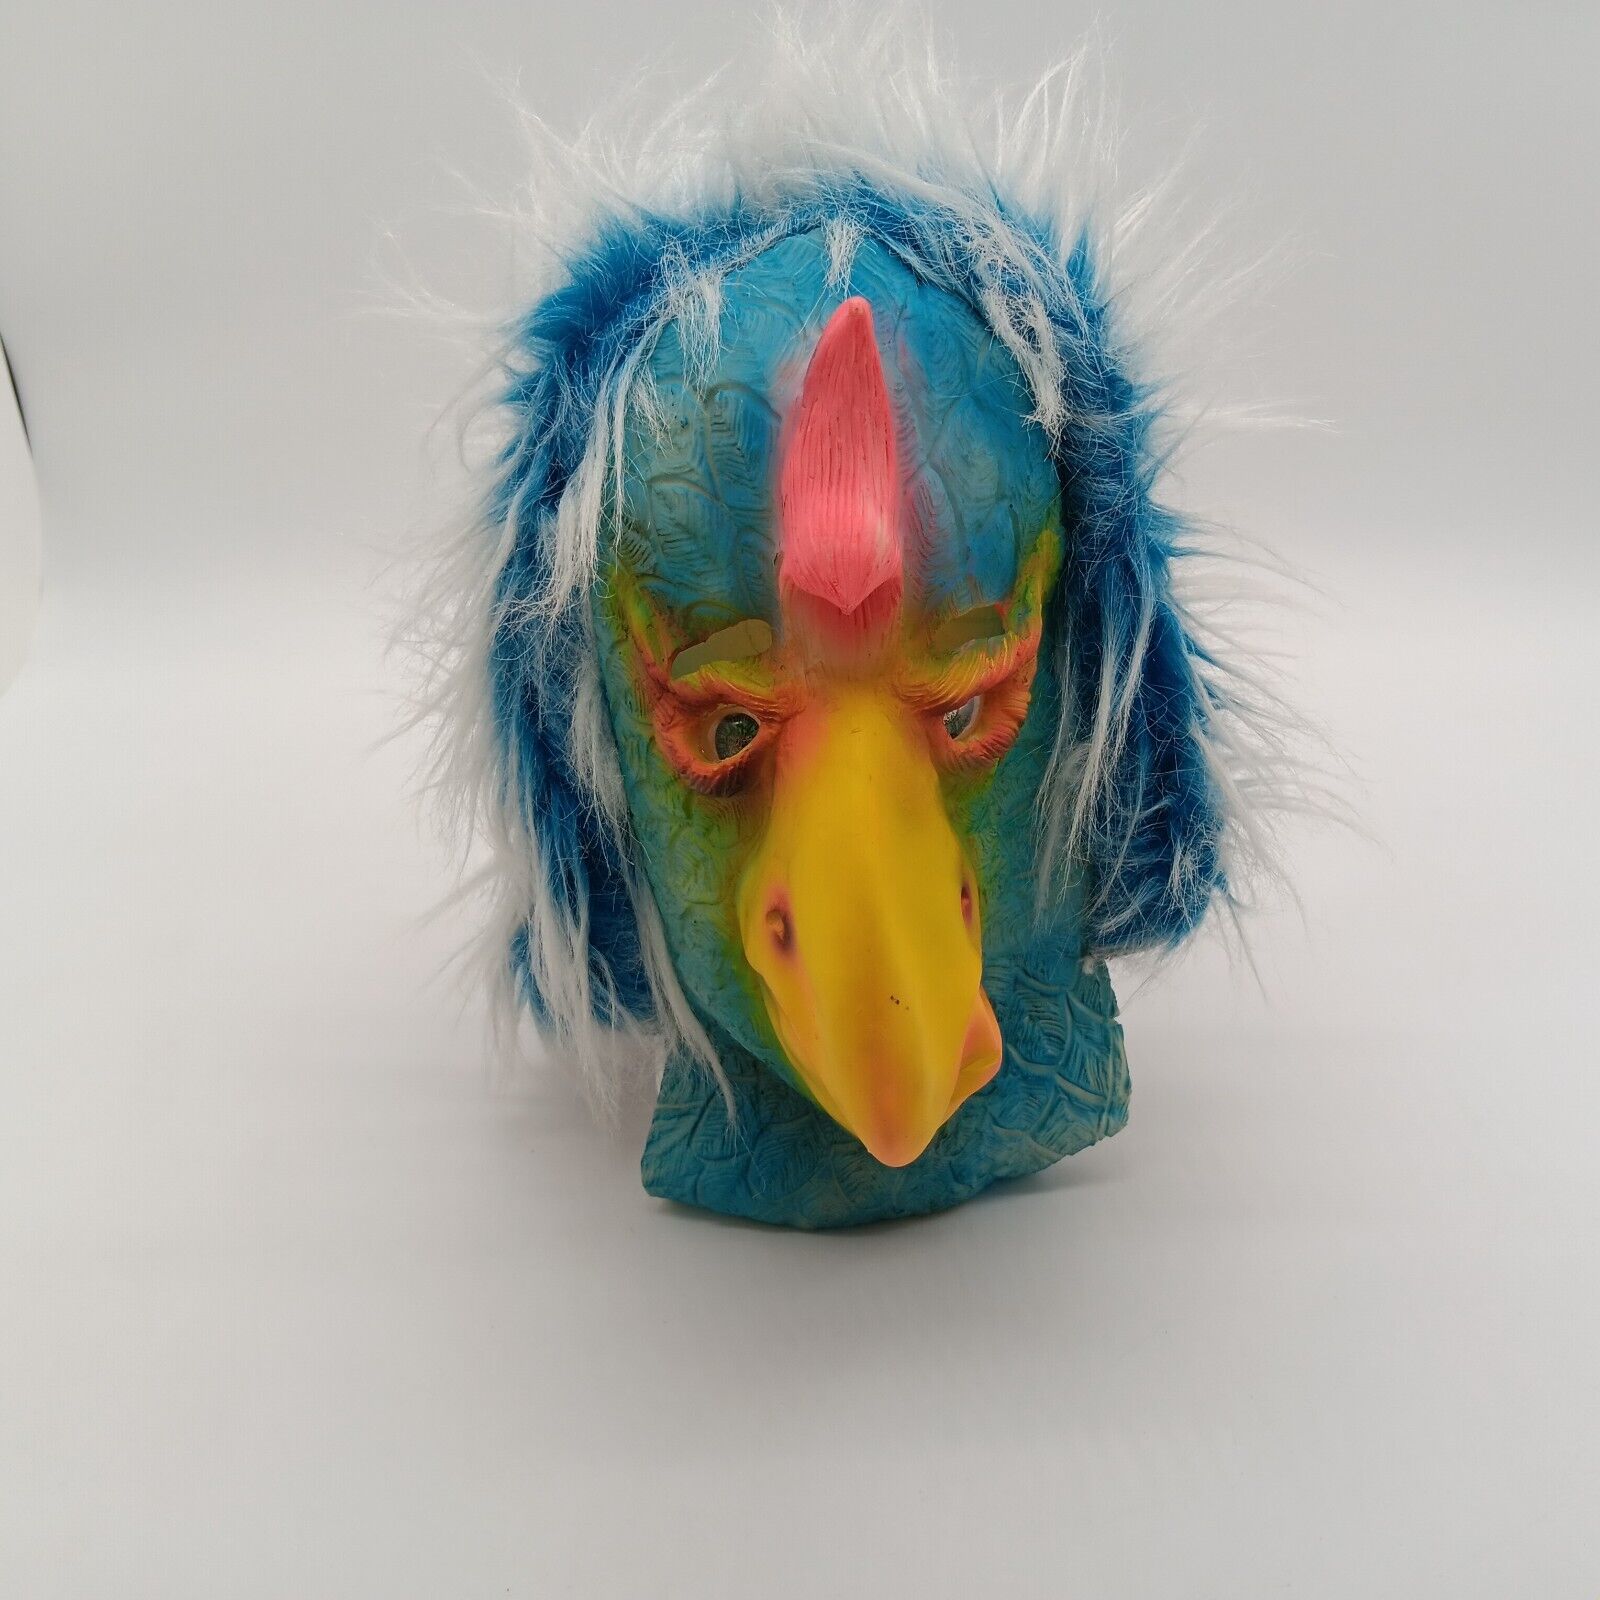 VINTAGE LATEX RUBBER Front WEIRD CHICKEN BIRD MASK W/ Frosted Blue Hair